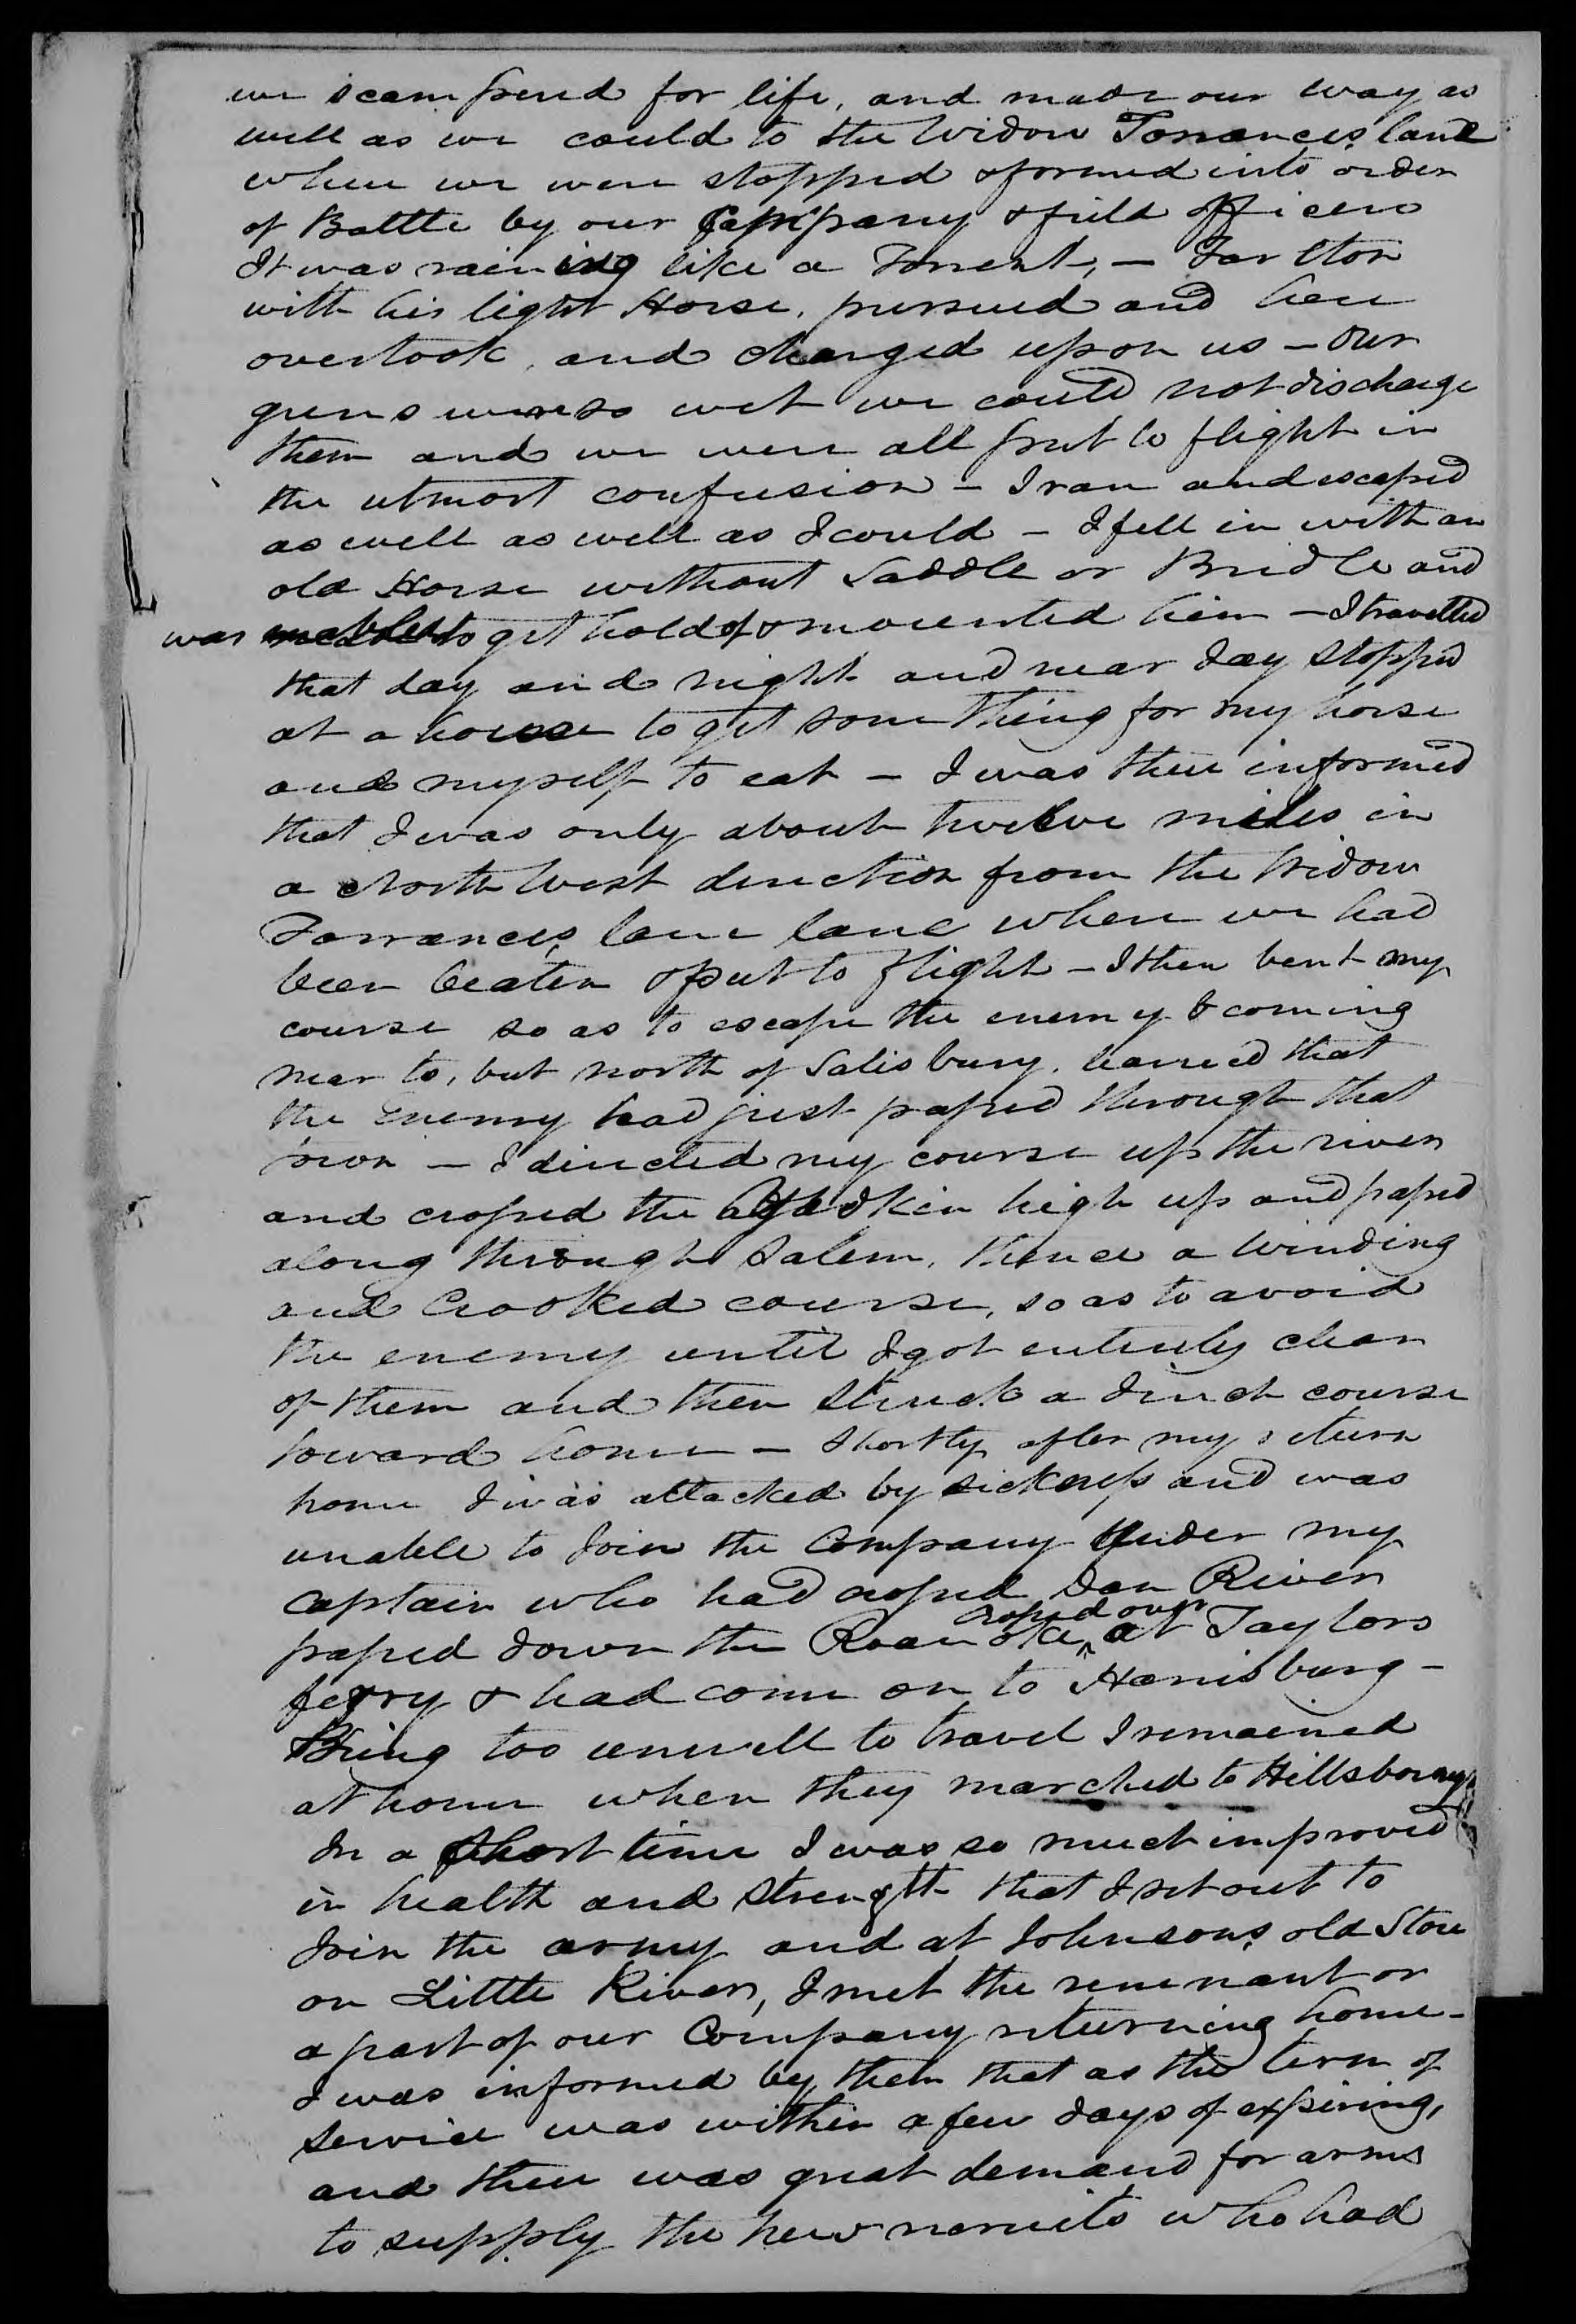 Application for a Veteran's Pension from William Taburn, 10 August 1832, page 4